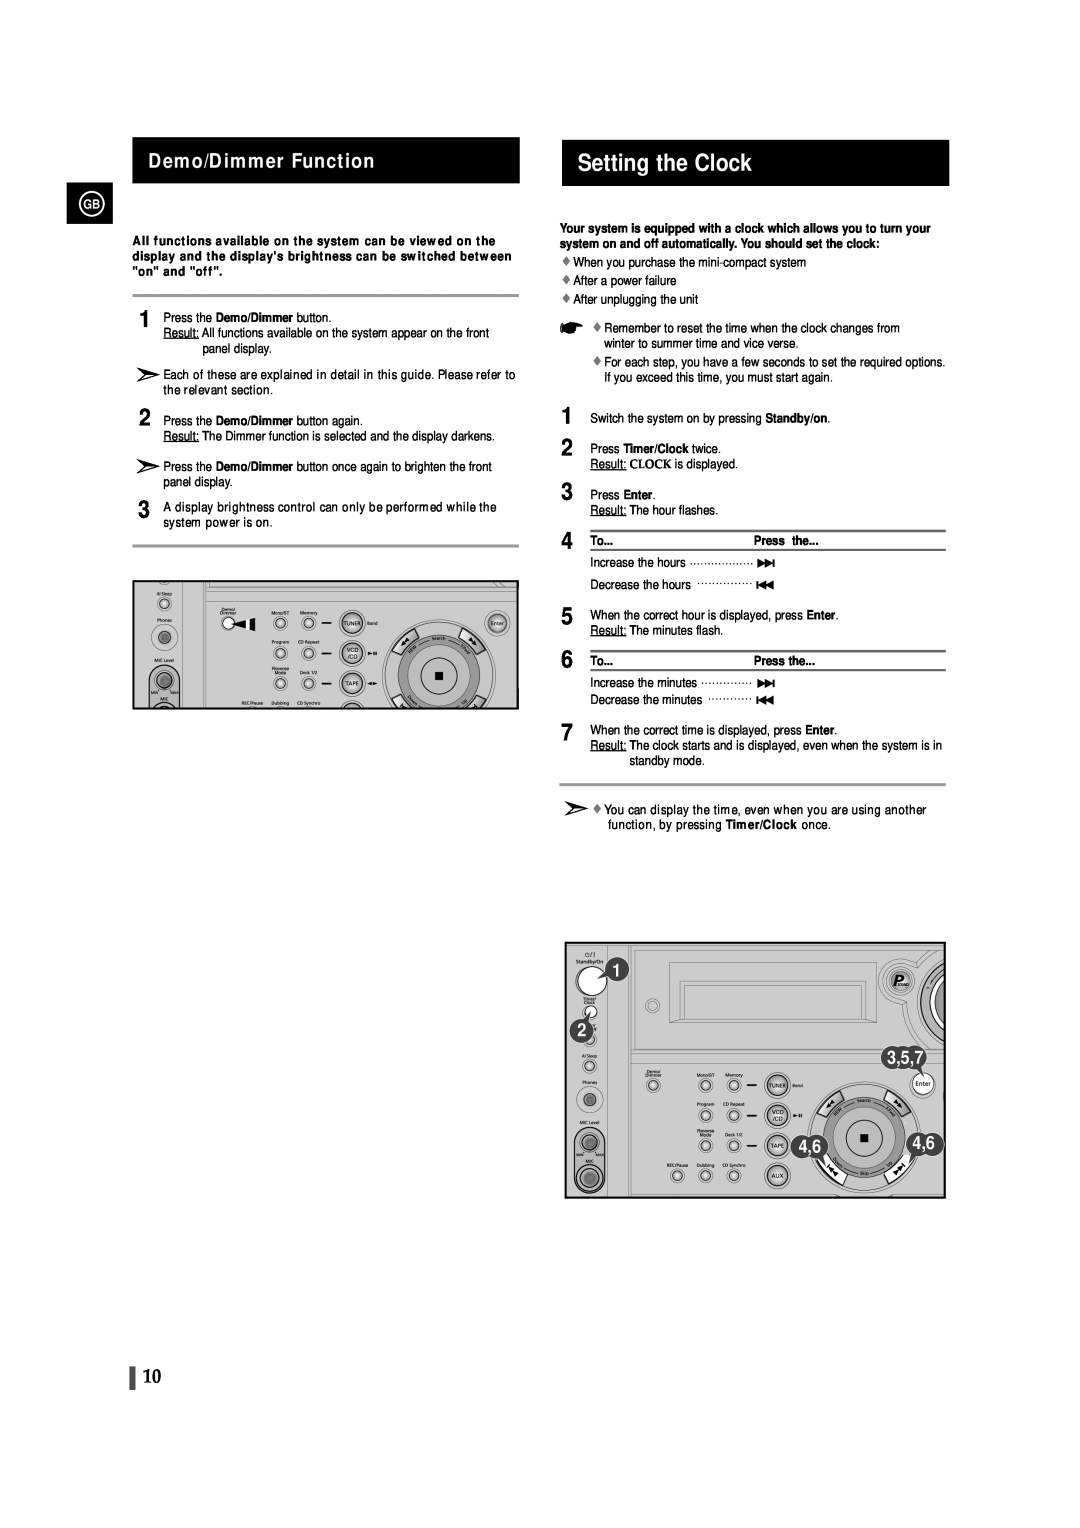 Samsung MAX-VS530 instruction manual Demo/Dimmer Function, Setting the Clock, 3,5,7, 4 To, Increase the hours 